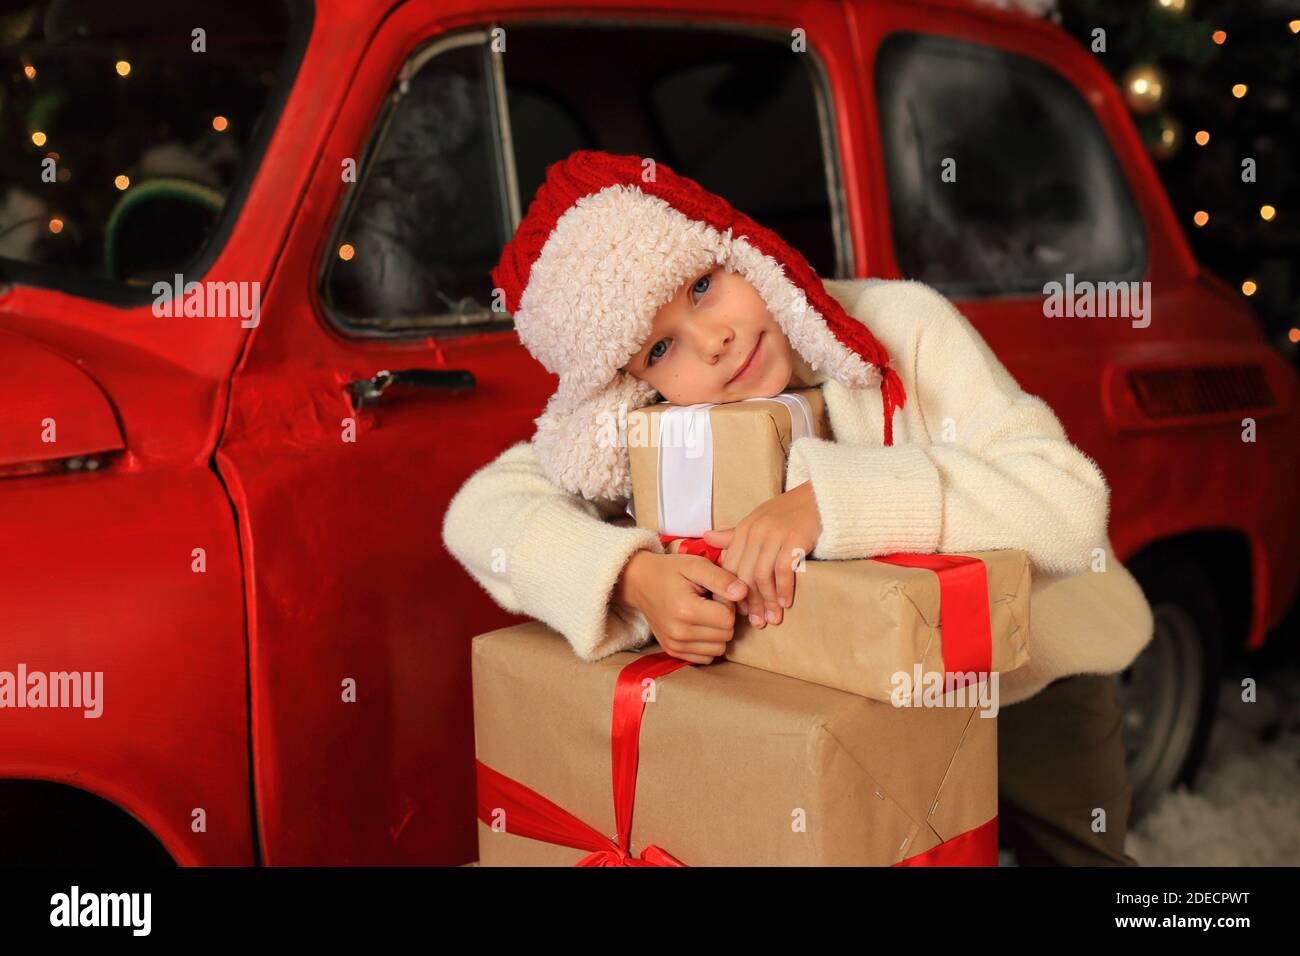 Boy on the background of a red car with gifts. Child is building a tower from Christmas boxes. Stock Photo